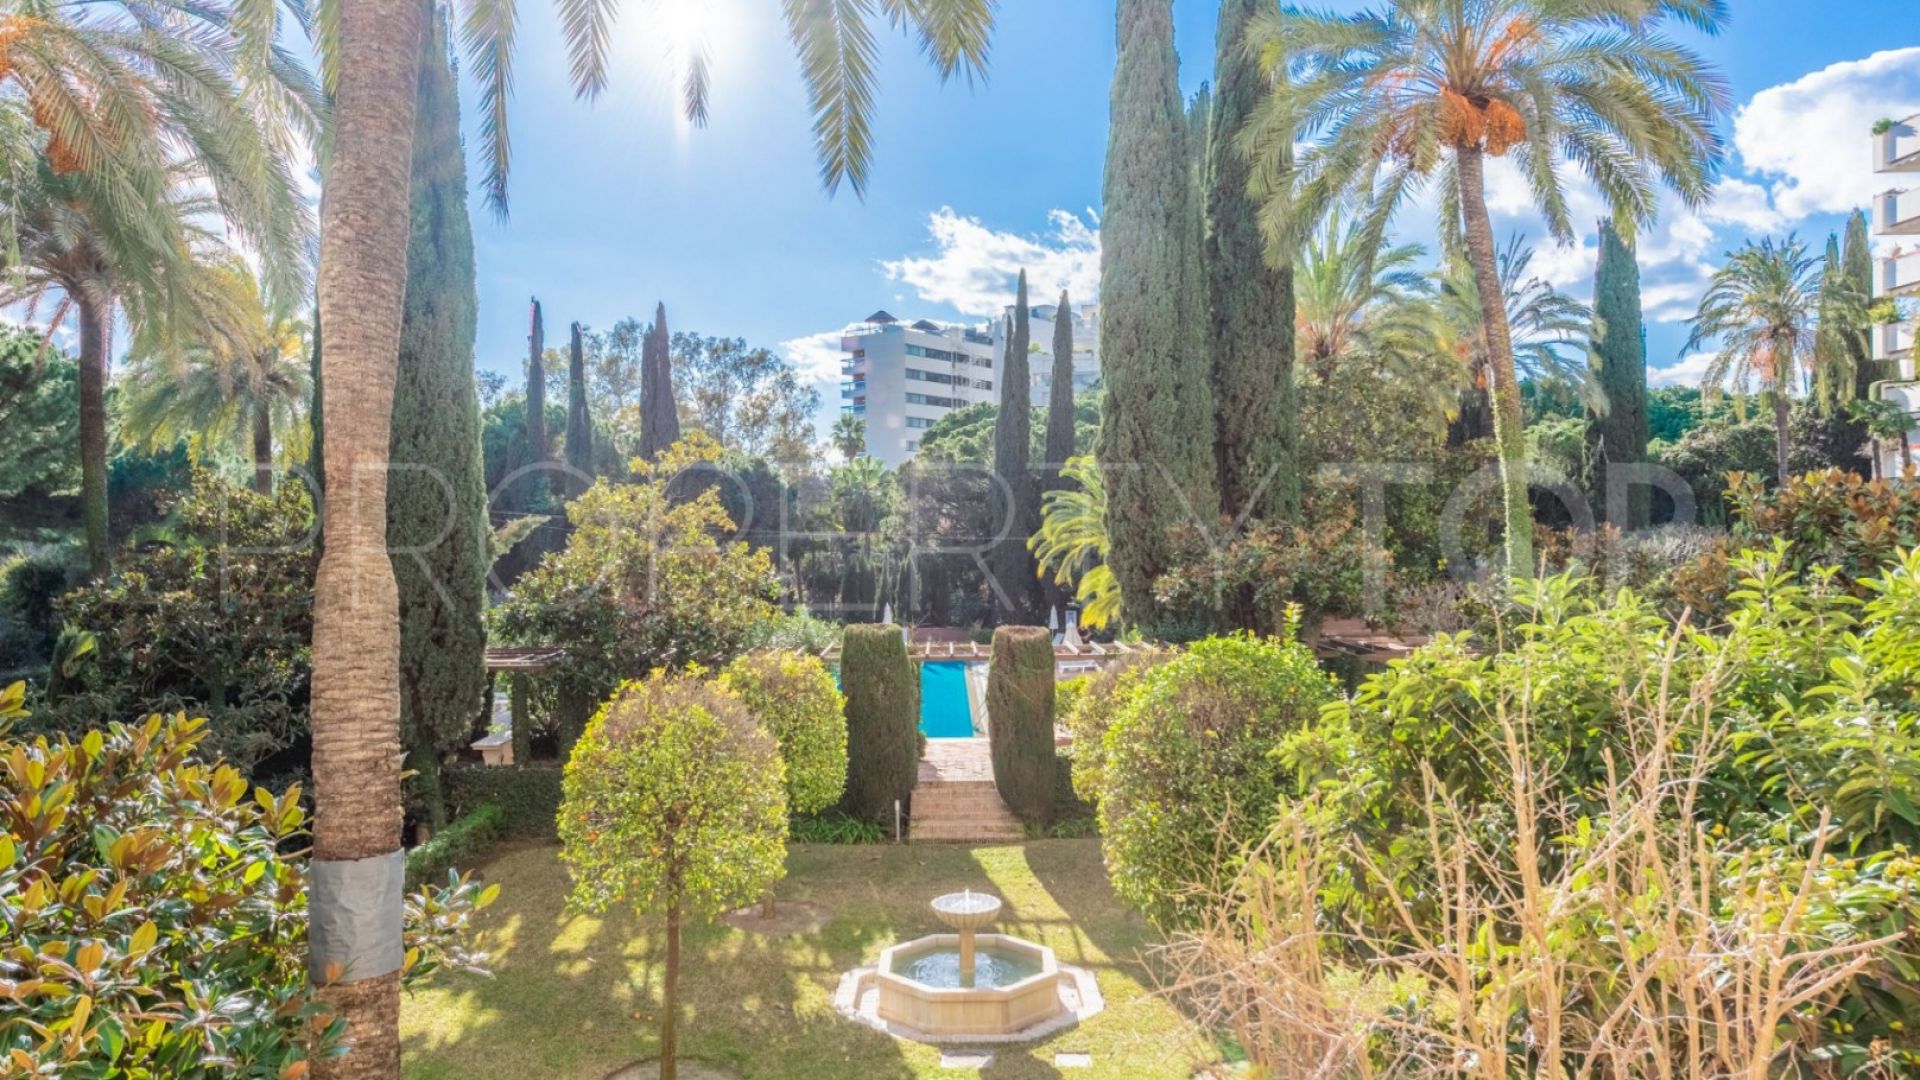 3 bedrooms apartment in Marbella for sale